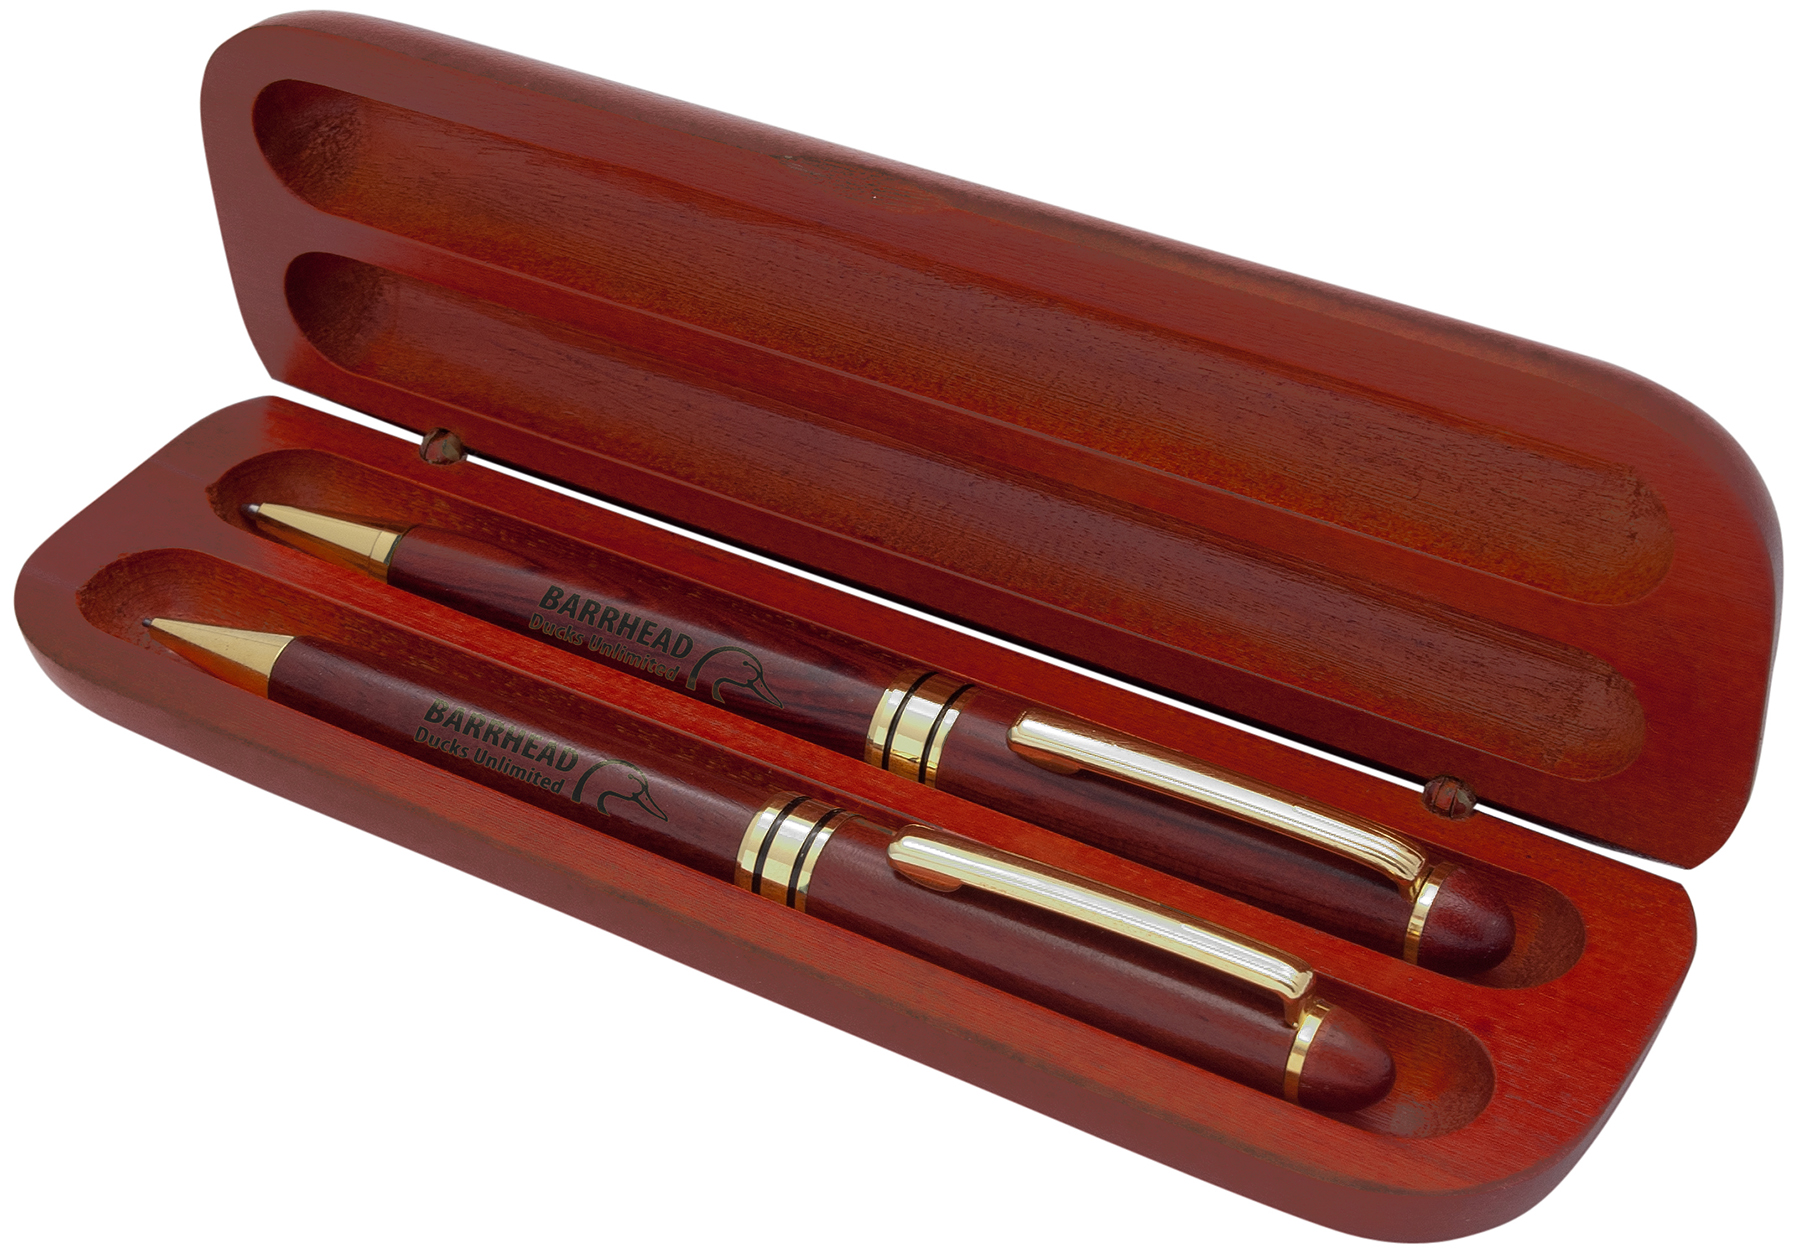 Groomsman Gift Handmade Gift Gift for Her Wedding Gift Client Gift Caribbean Rosewood Gold Pen Fathers Day Gift Gift for Him